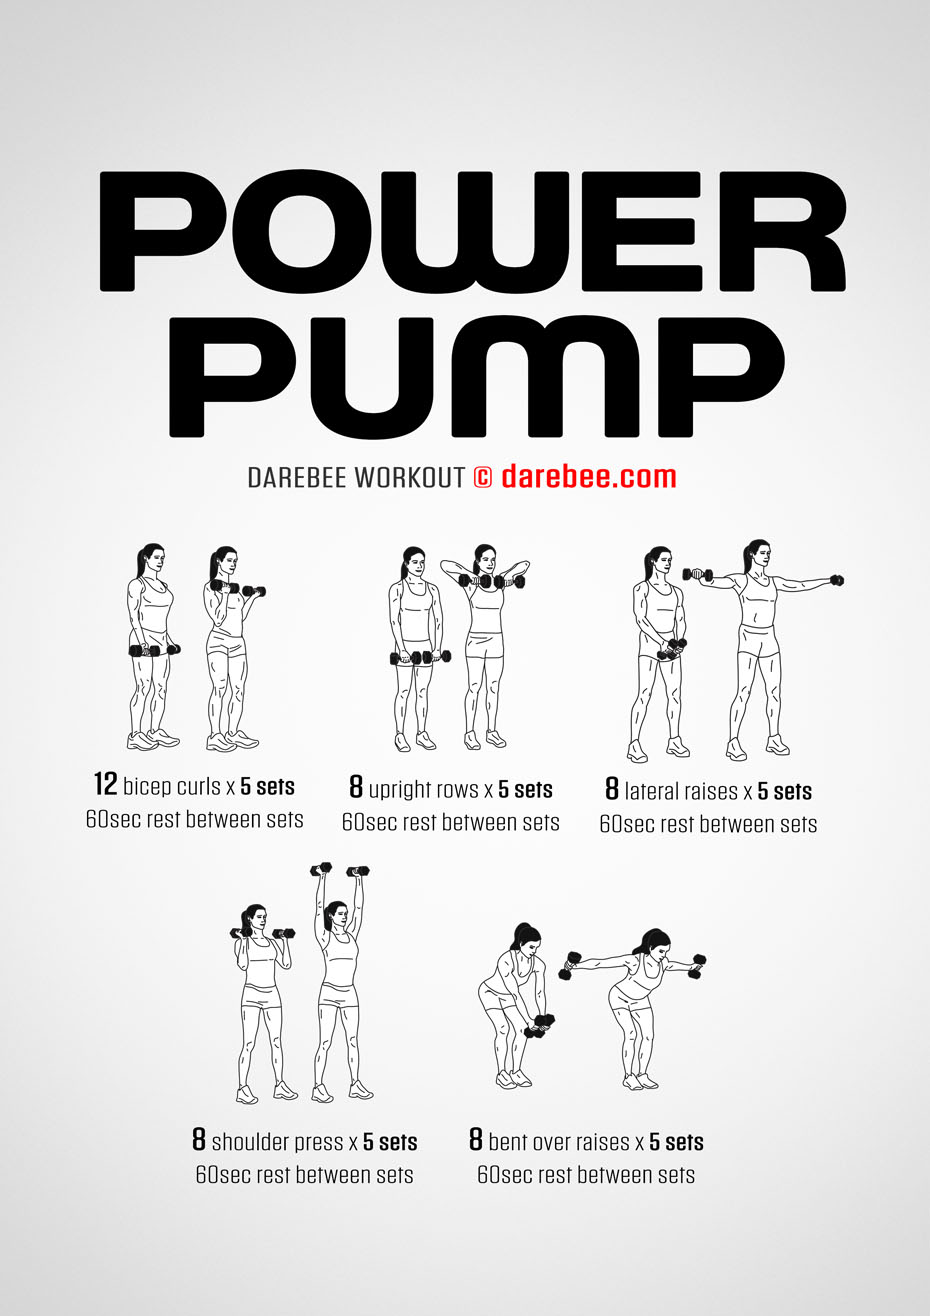 Power Pump is a Darebee home-fitness workout that helps you make excellent use of your dumbbells to build great upper body strength and muscle tone.